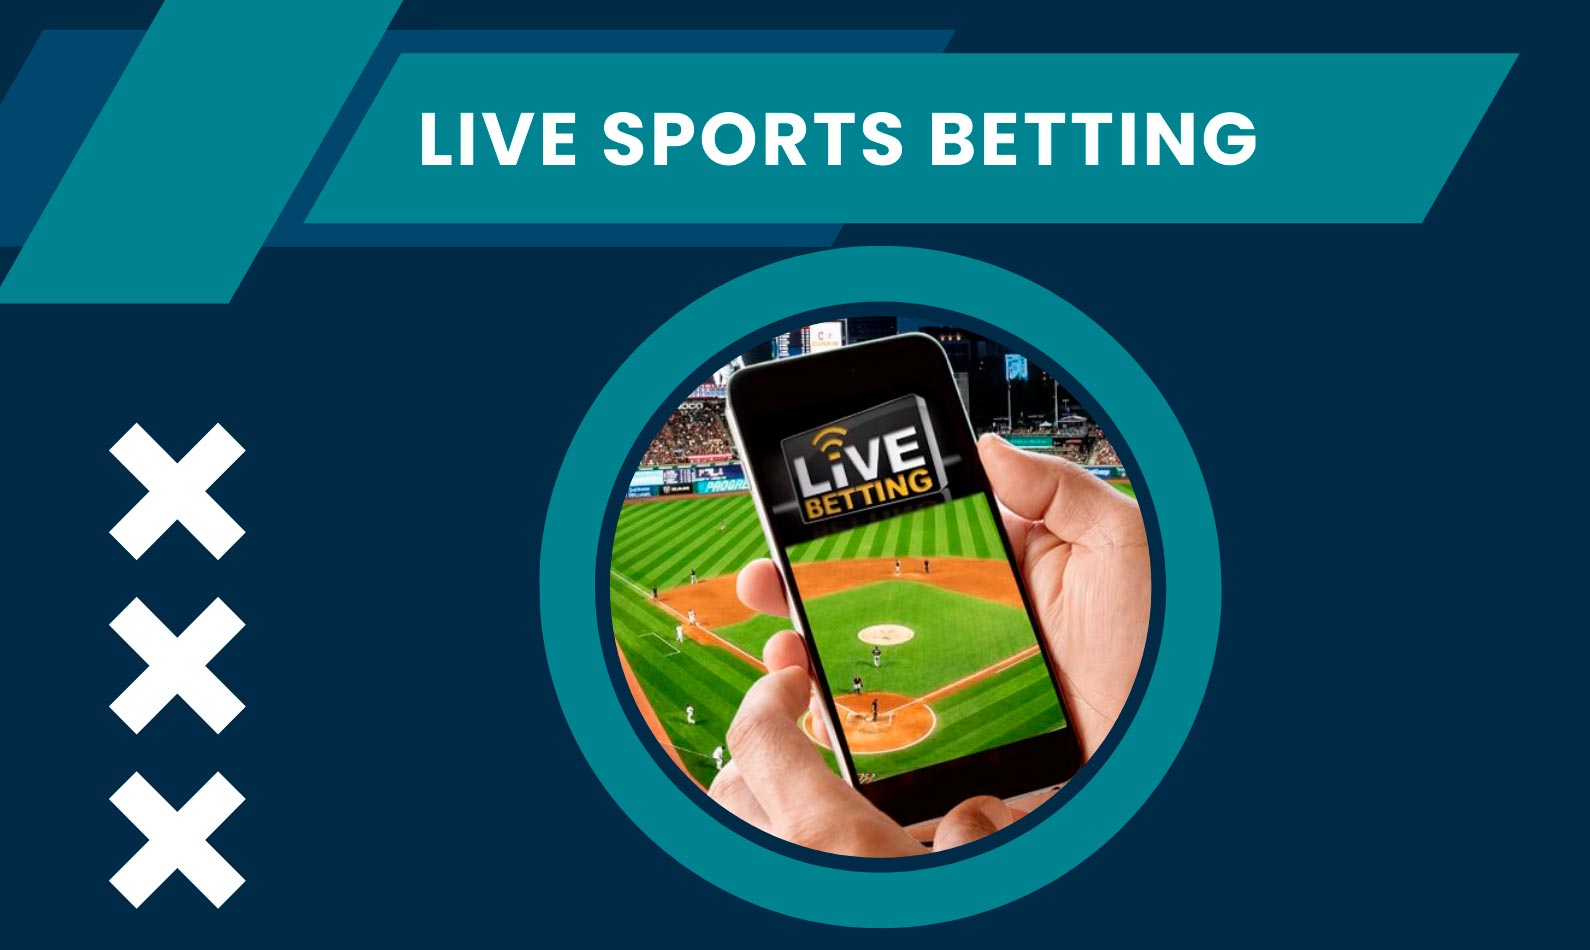 Betting on sports live